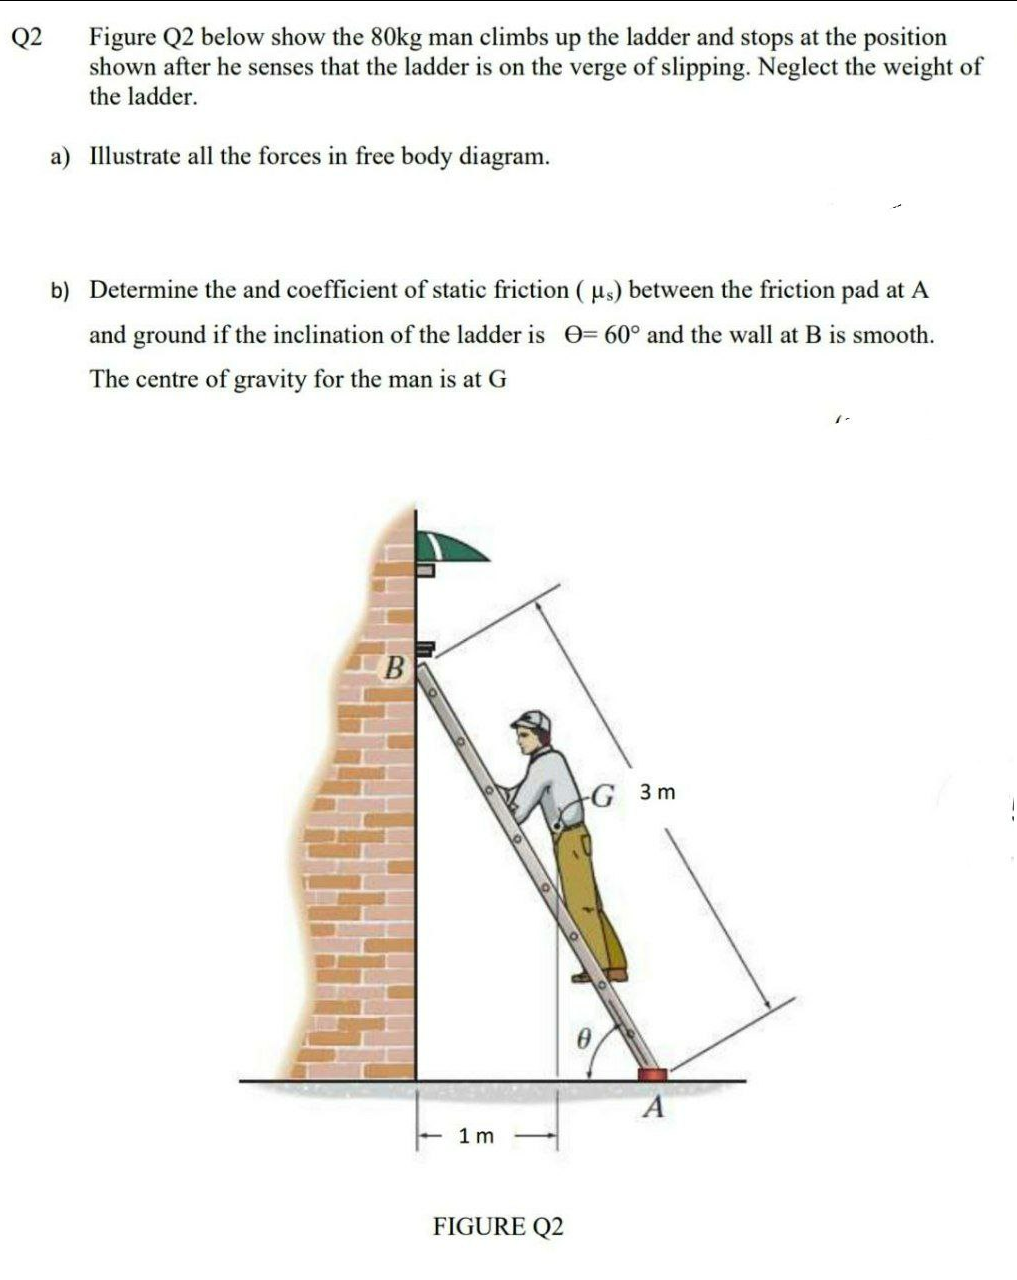 Q2
Figure Q2 below show the 80kg man climbs up the ladder and stops at the position
shown after he senses that the ladder is on the verge of slipping. Neglect the weight of
the ladder.
a) Illustrate all the forces in free body diagram.
b) Determine the and coefficient of static friction ( us) between the friction pad at A
and ground if the inclination of the ladder is 0= 60° and the wall at B is smooth.
The centre of gravity for the man is at G
G 3 m
1 m
FIGURE Q2
